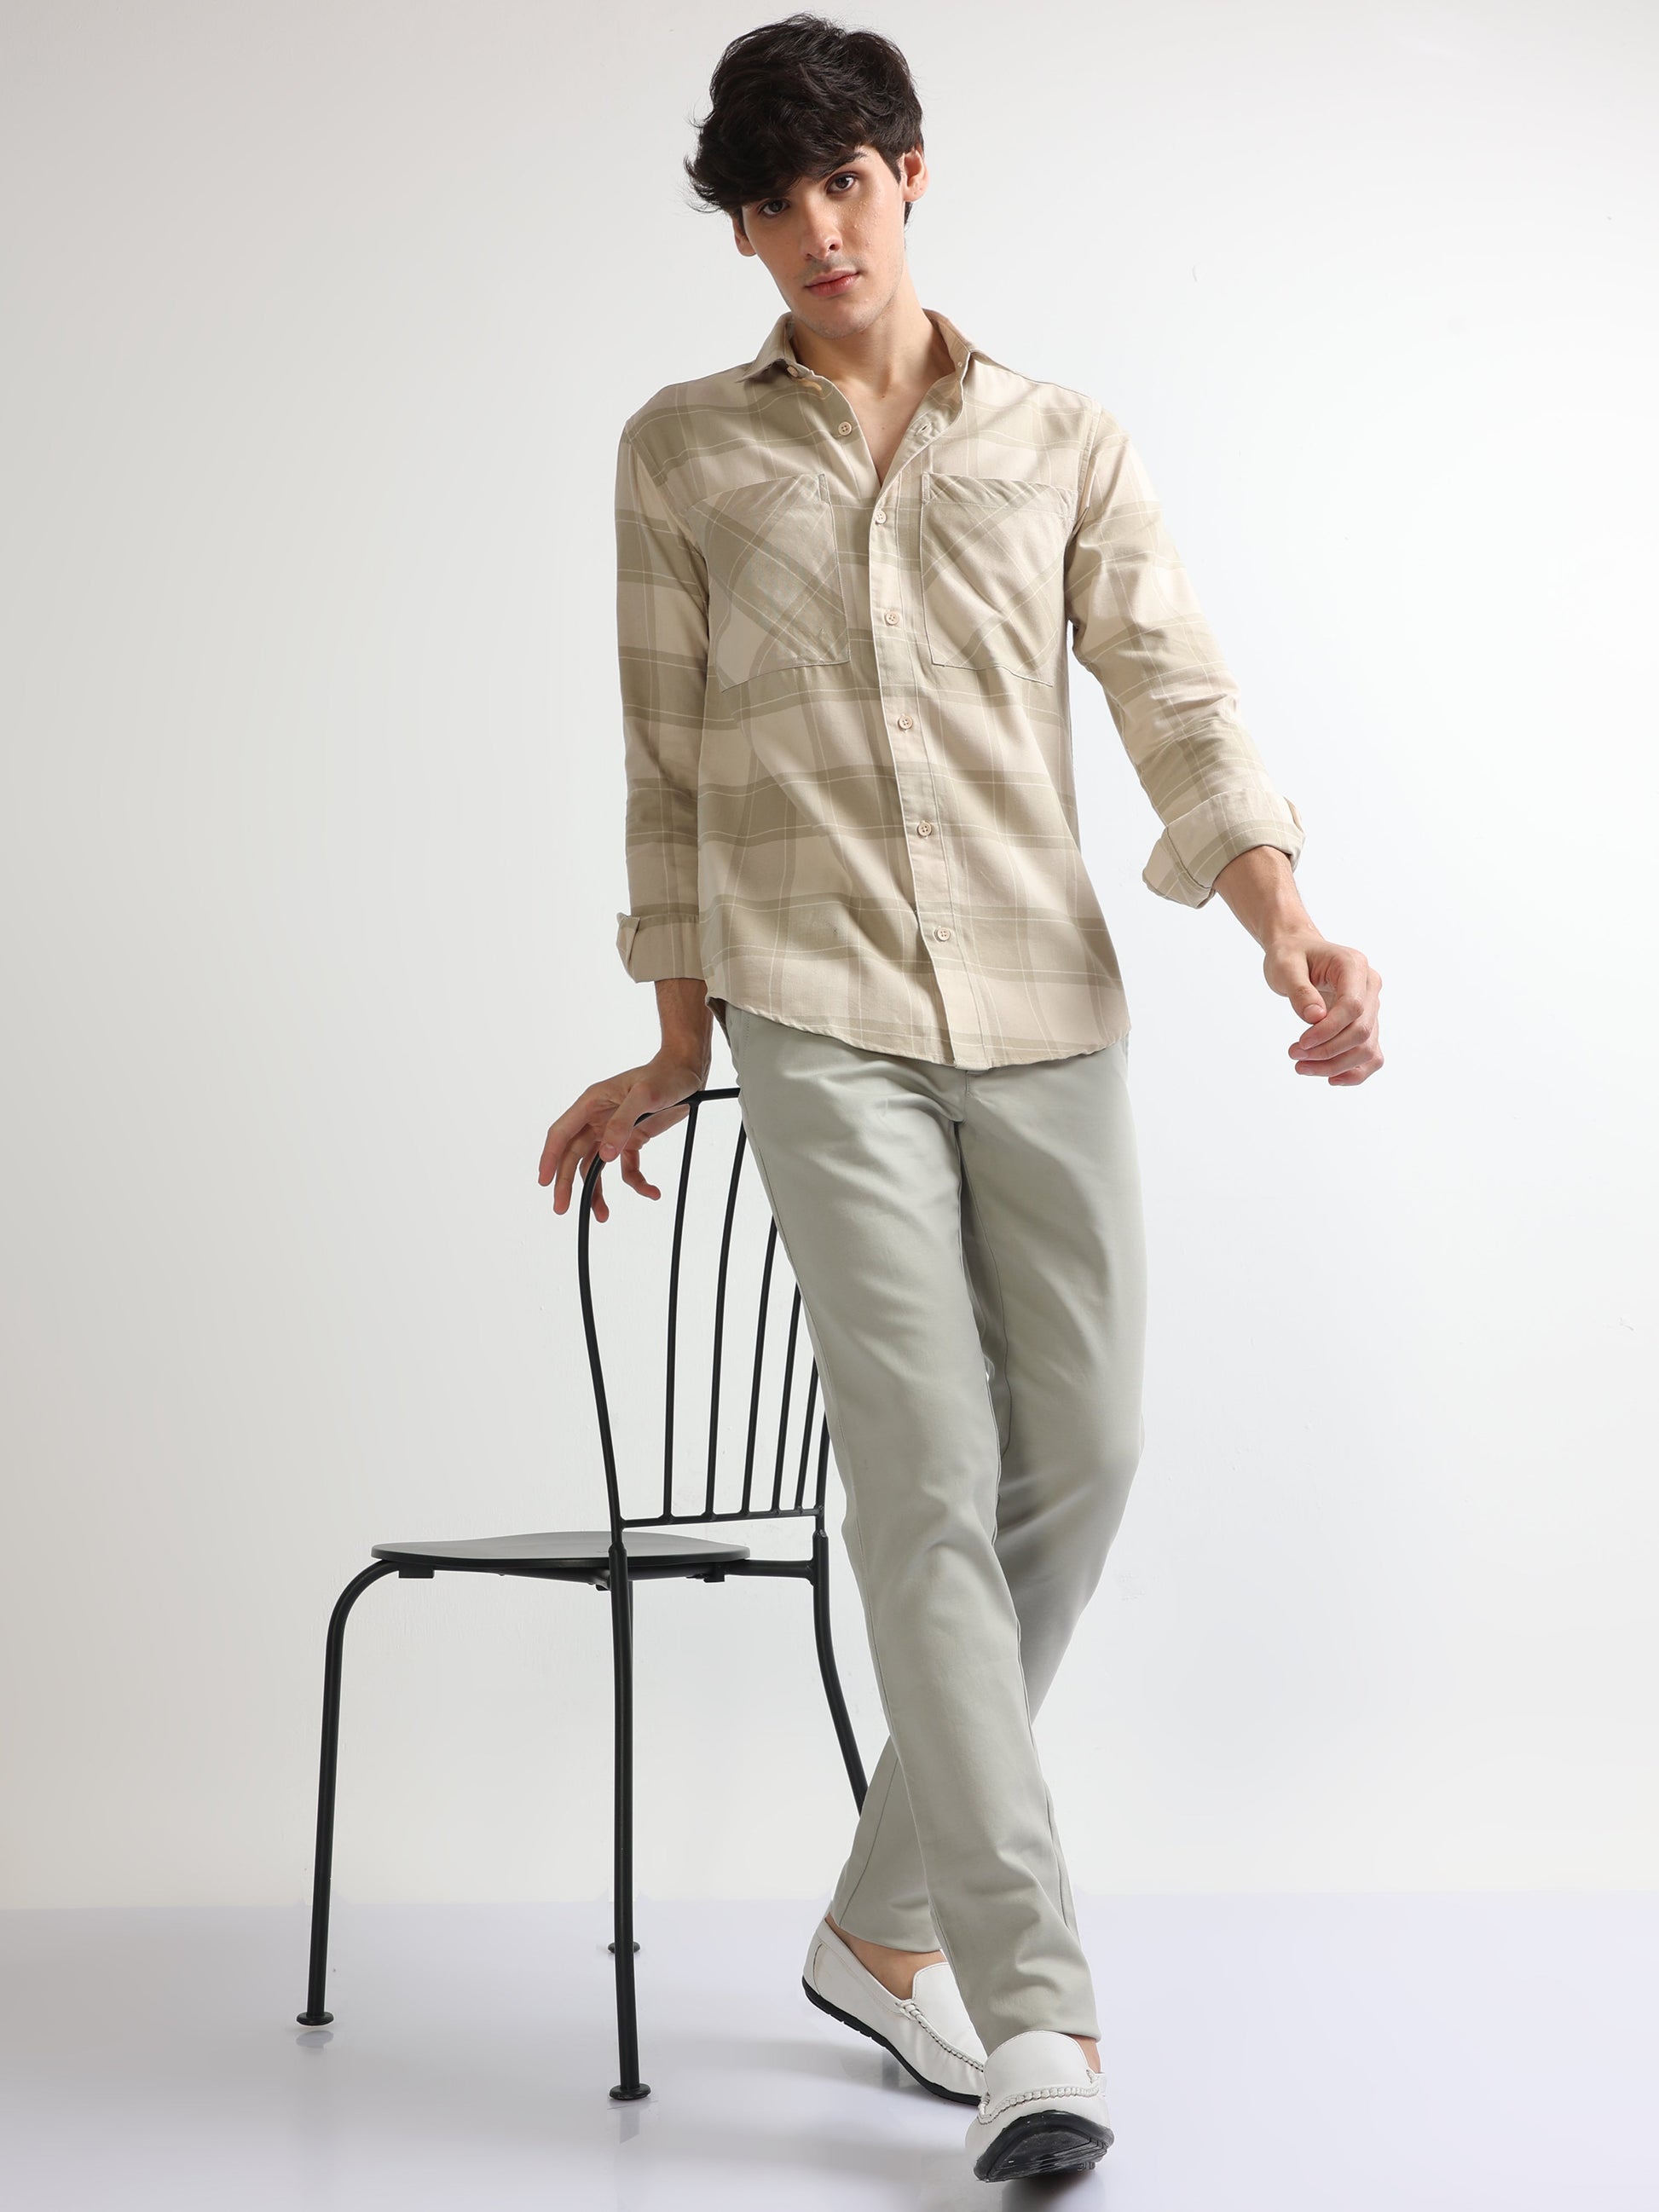 brushed twill beige bias double pocket checked shirt